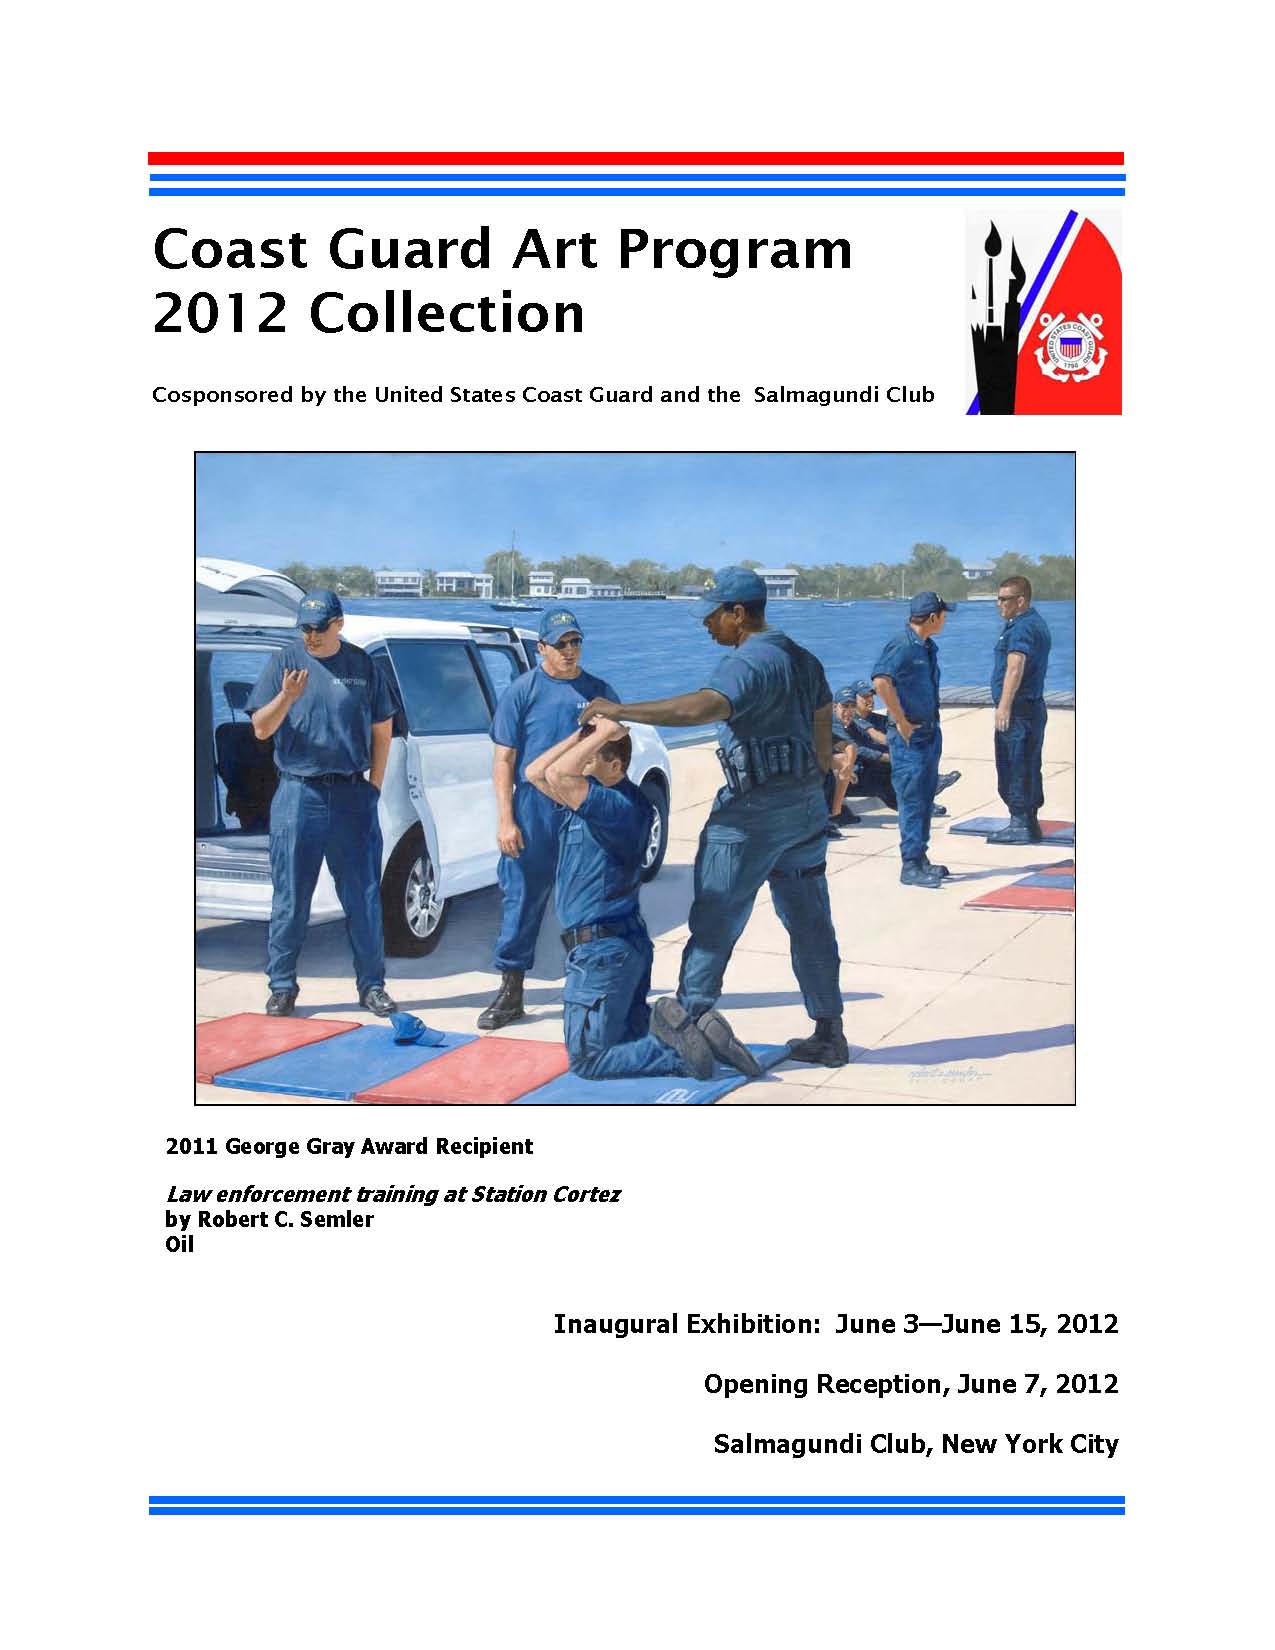 Coast Guard Art Program 2012 Collection Front Cover